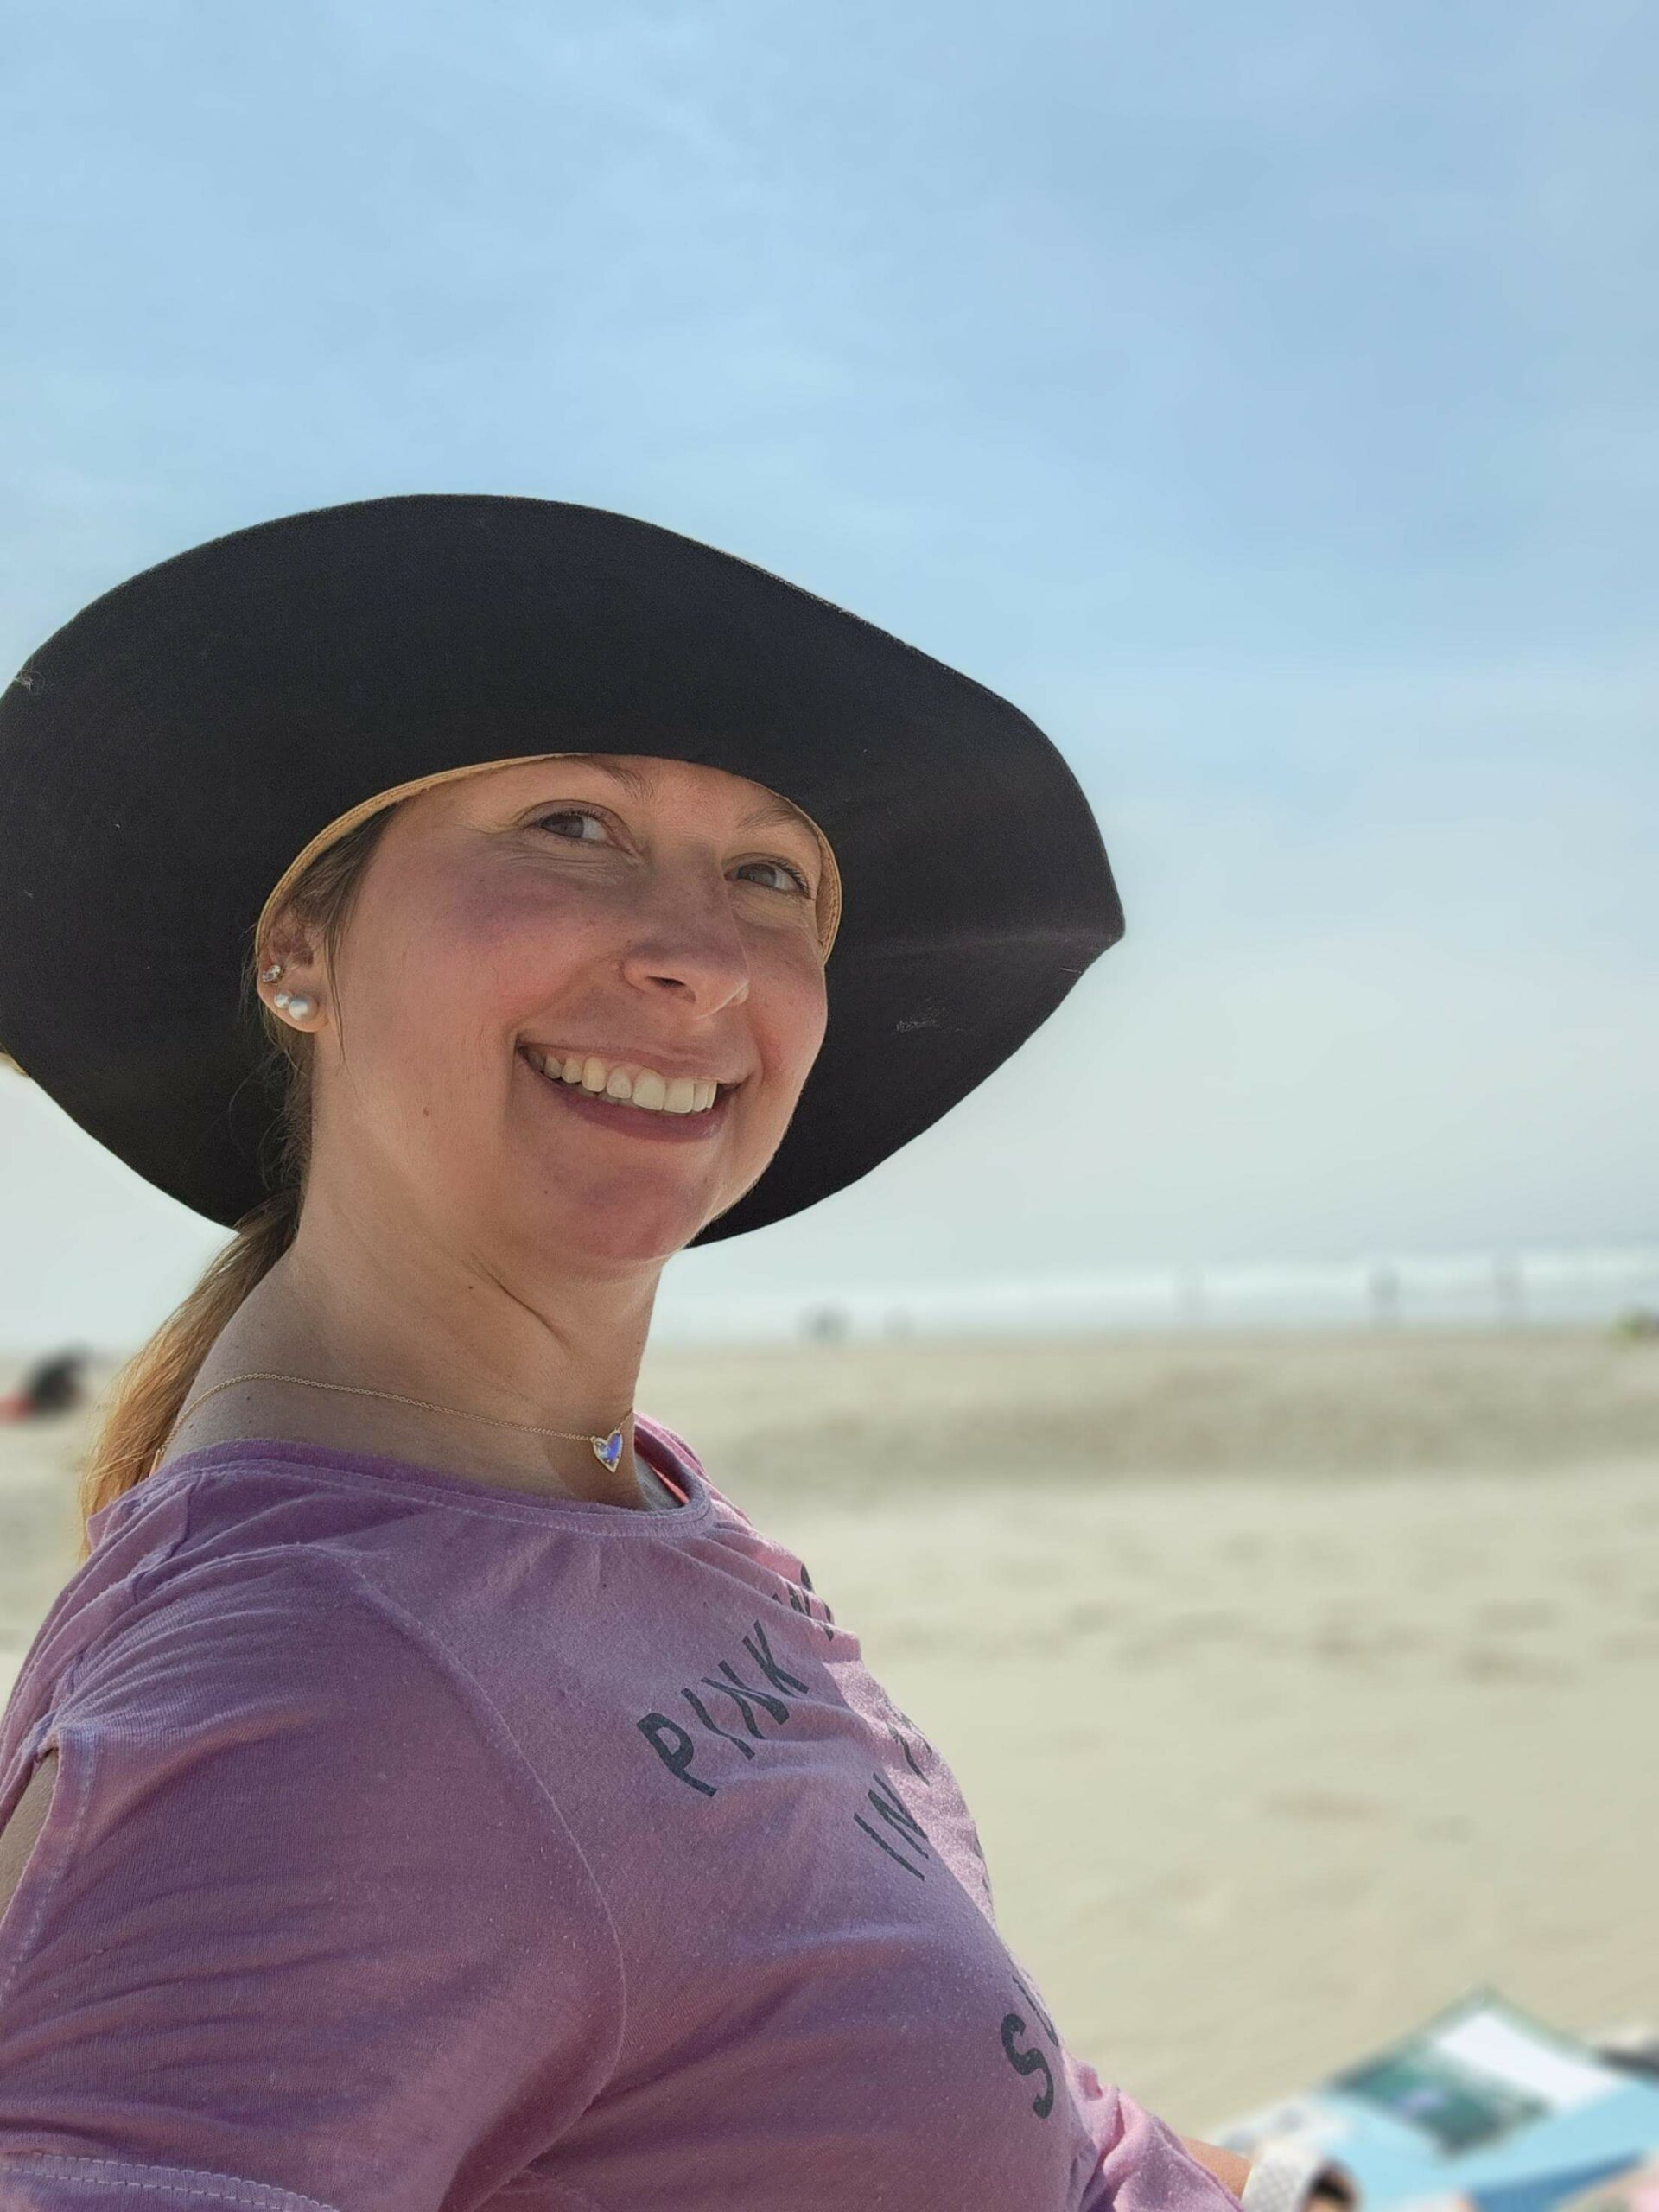 Linda sitting and smiling at the beach. She's wearing a large brimmed black hat.